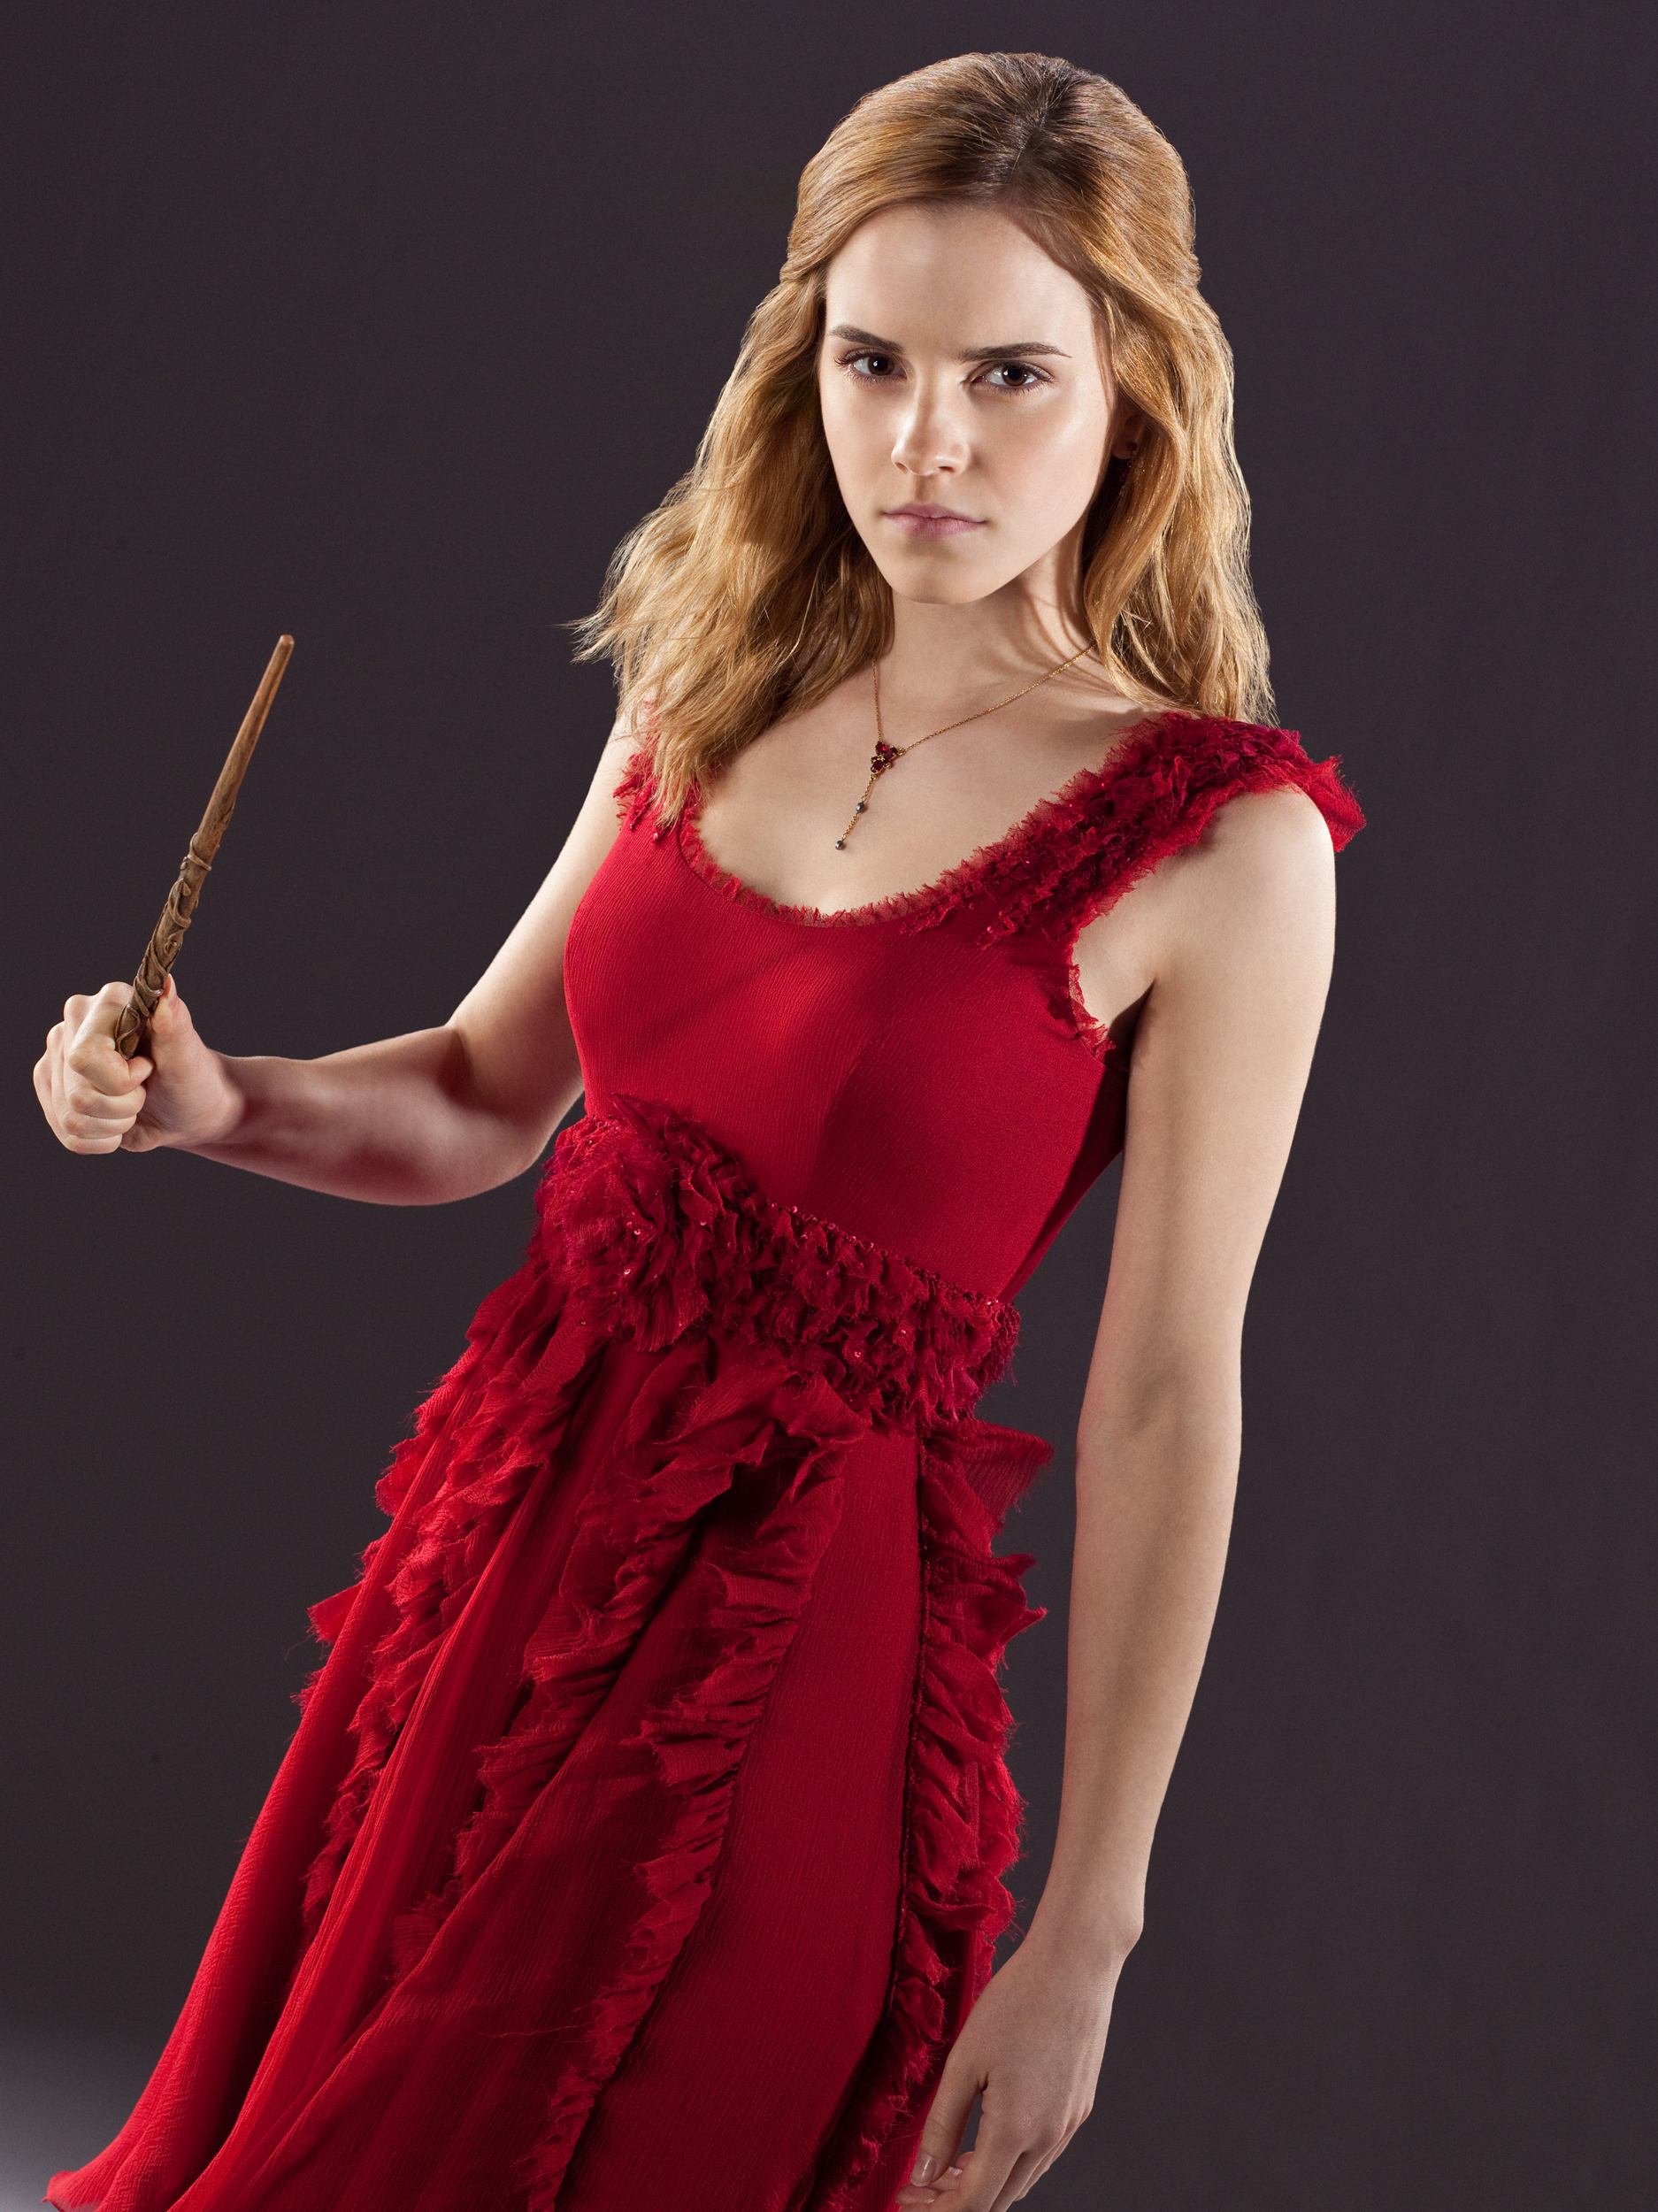 Emma Watson - Harry Potter and the Deathly Hallows promoshoot (2010/